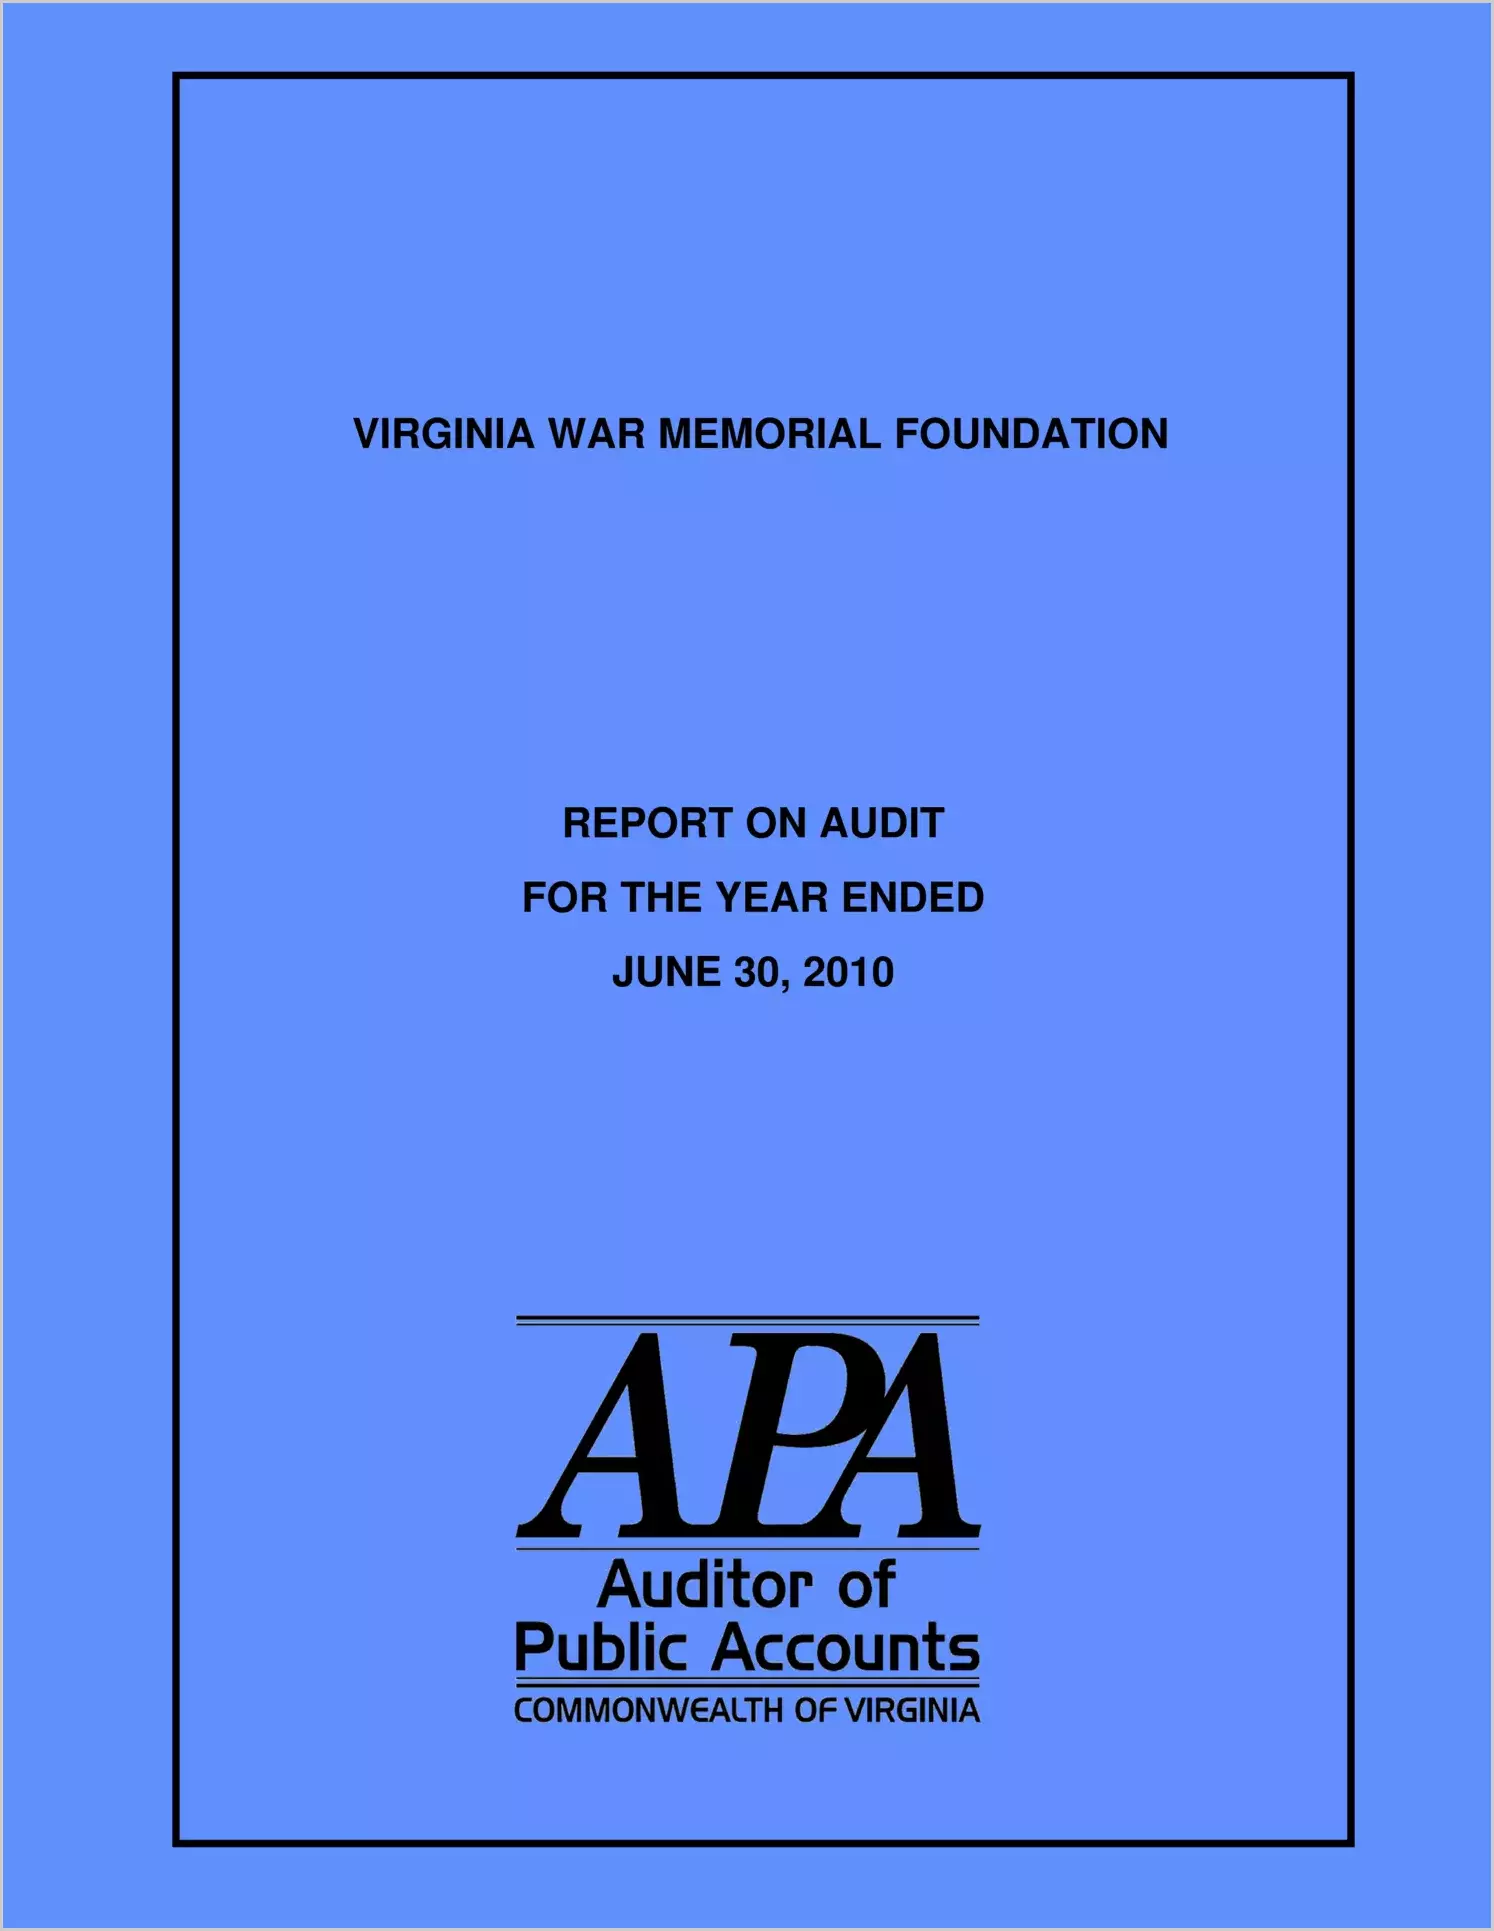 Virginia War Memorial Foundation report on audit for the year ended June 30, 2010